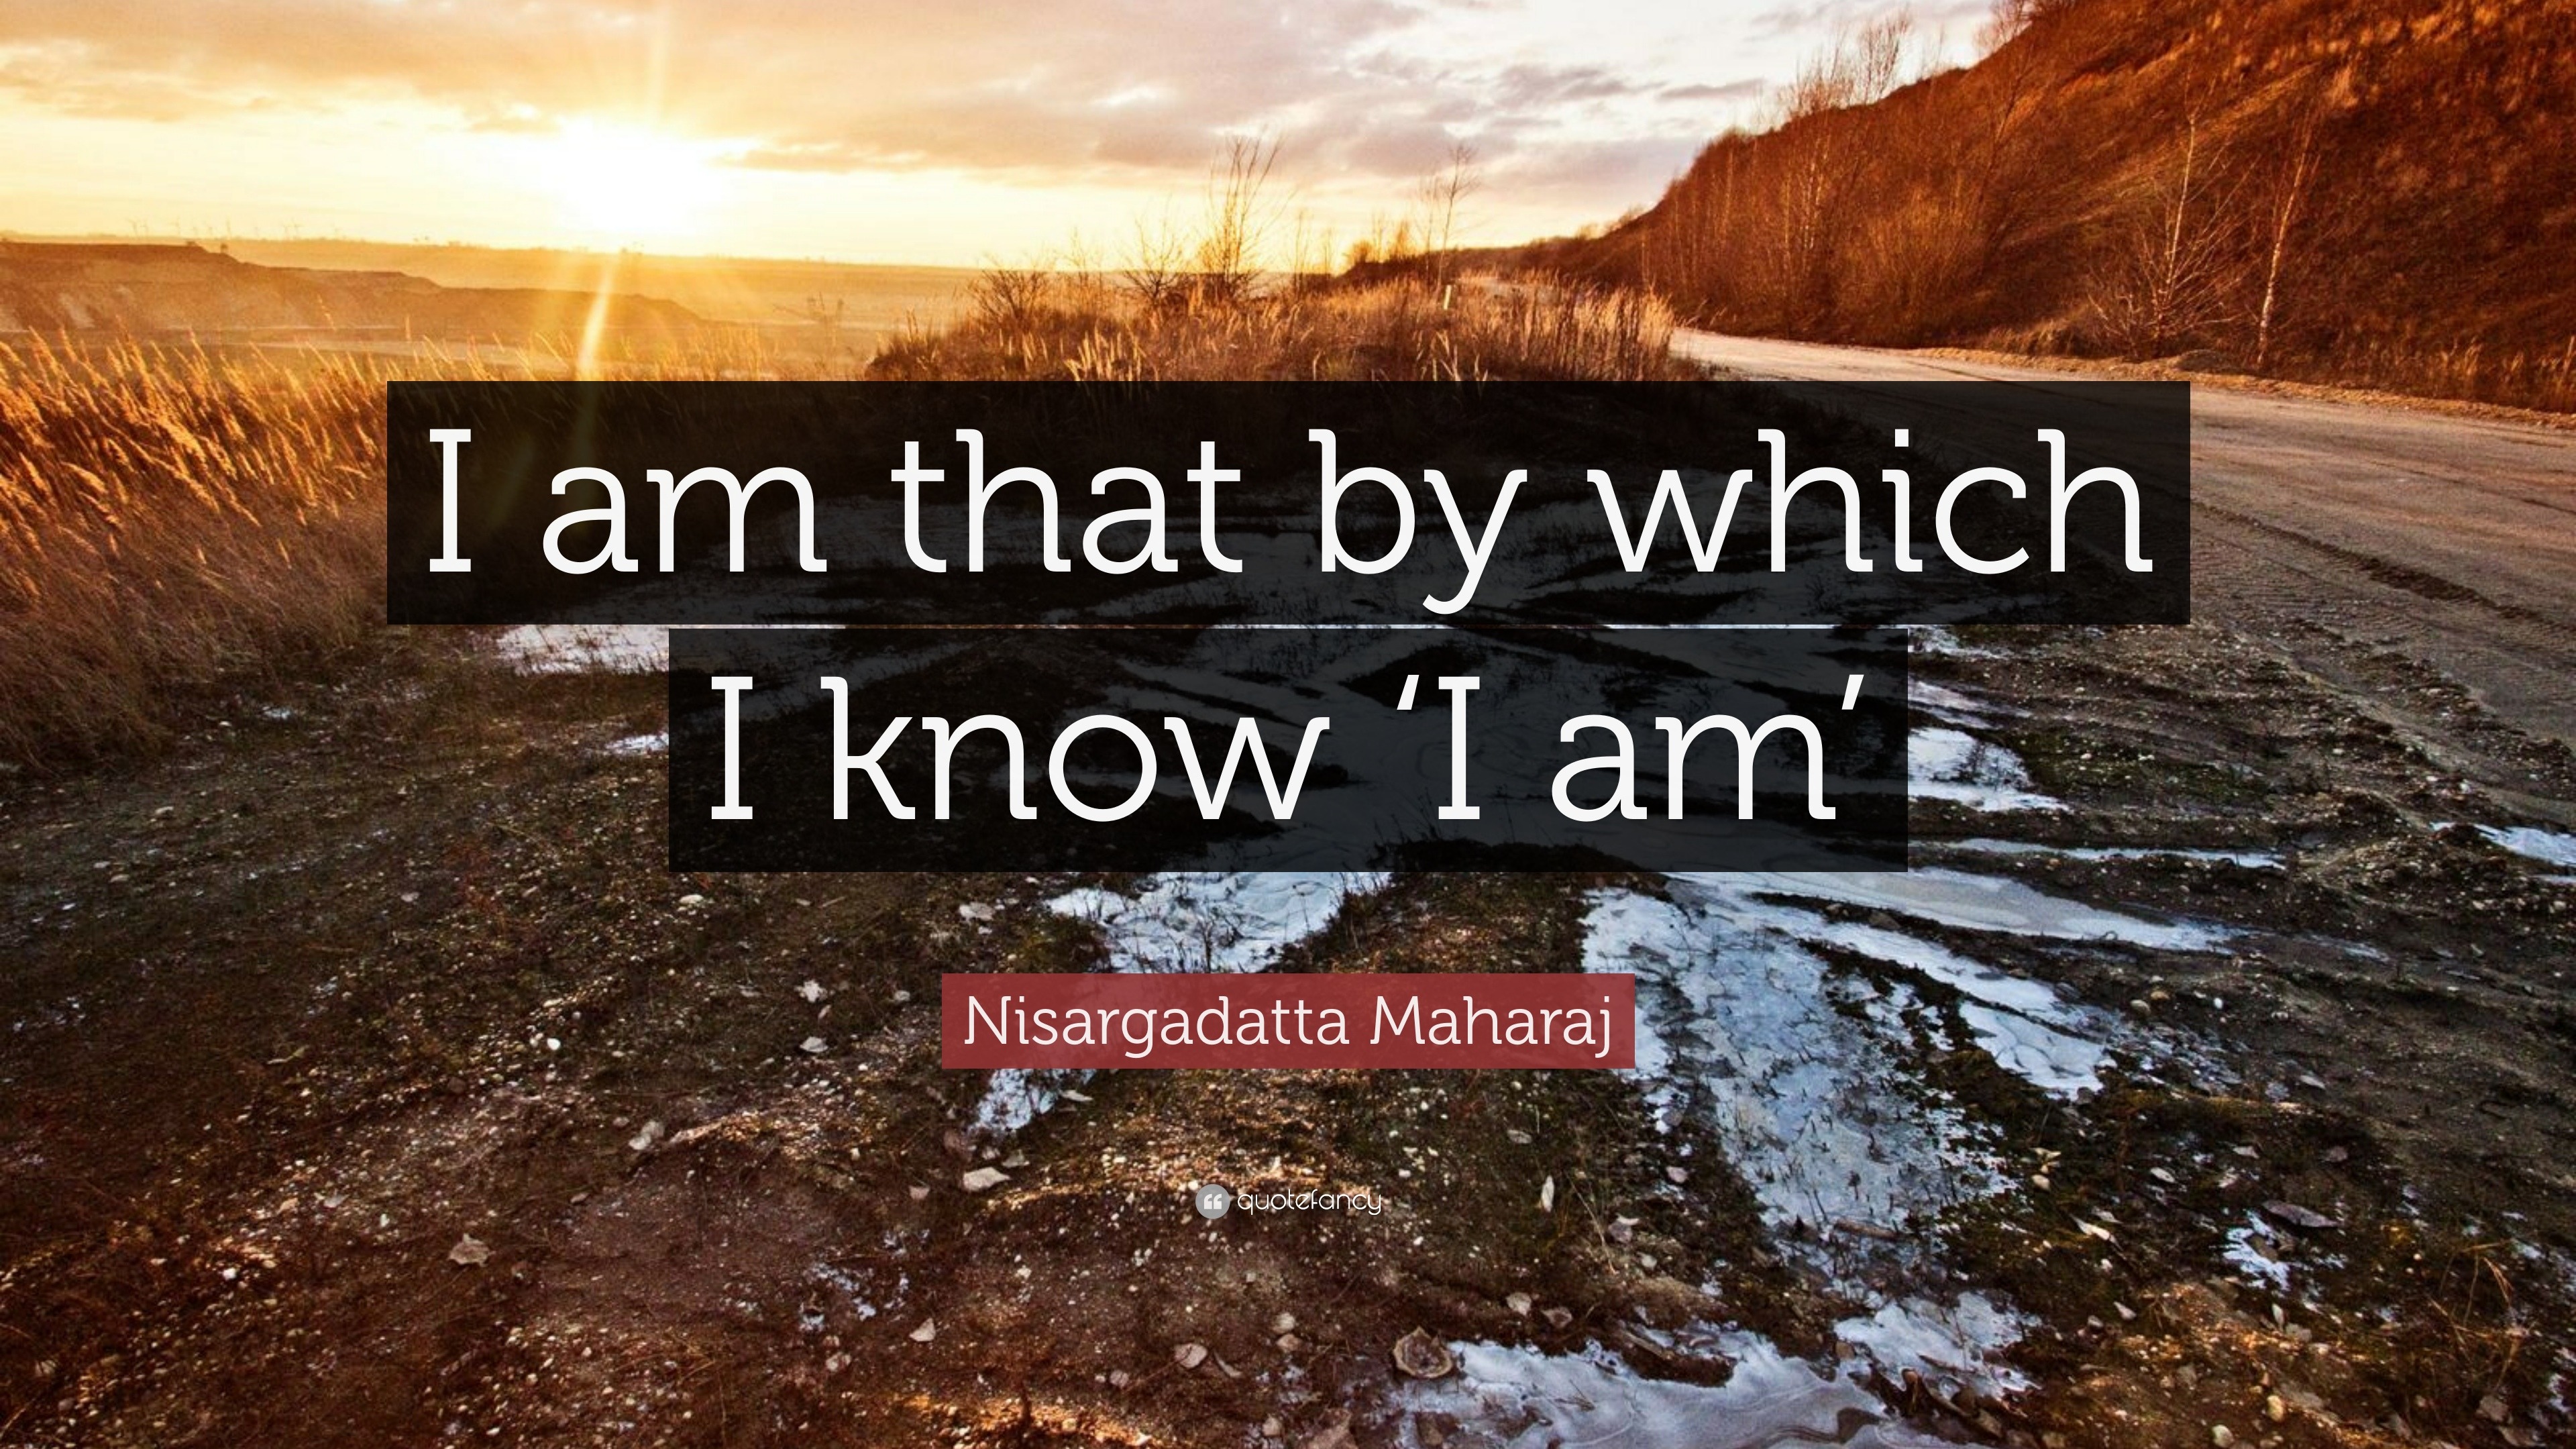 Nisargadatta Maharaj Quote: “I am that by which I know ‘I am’”